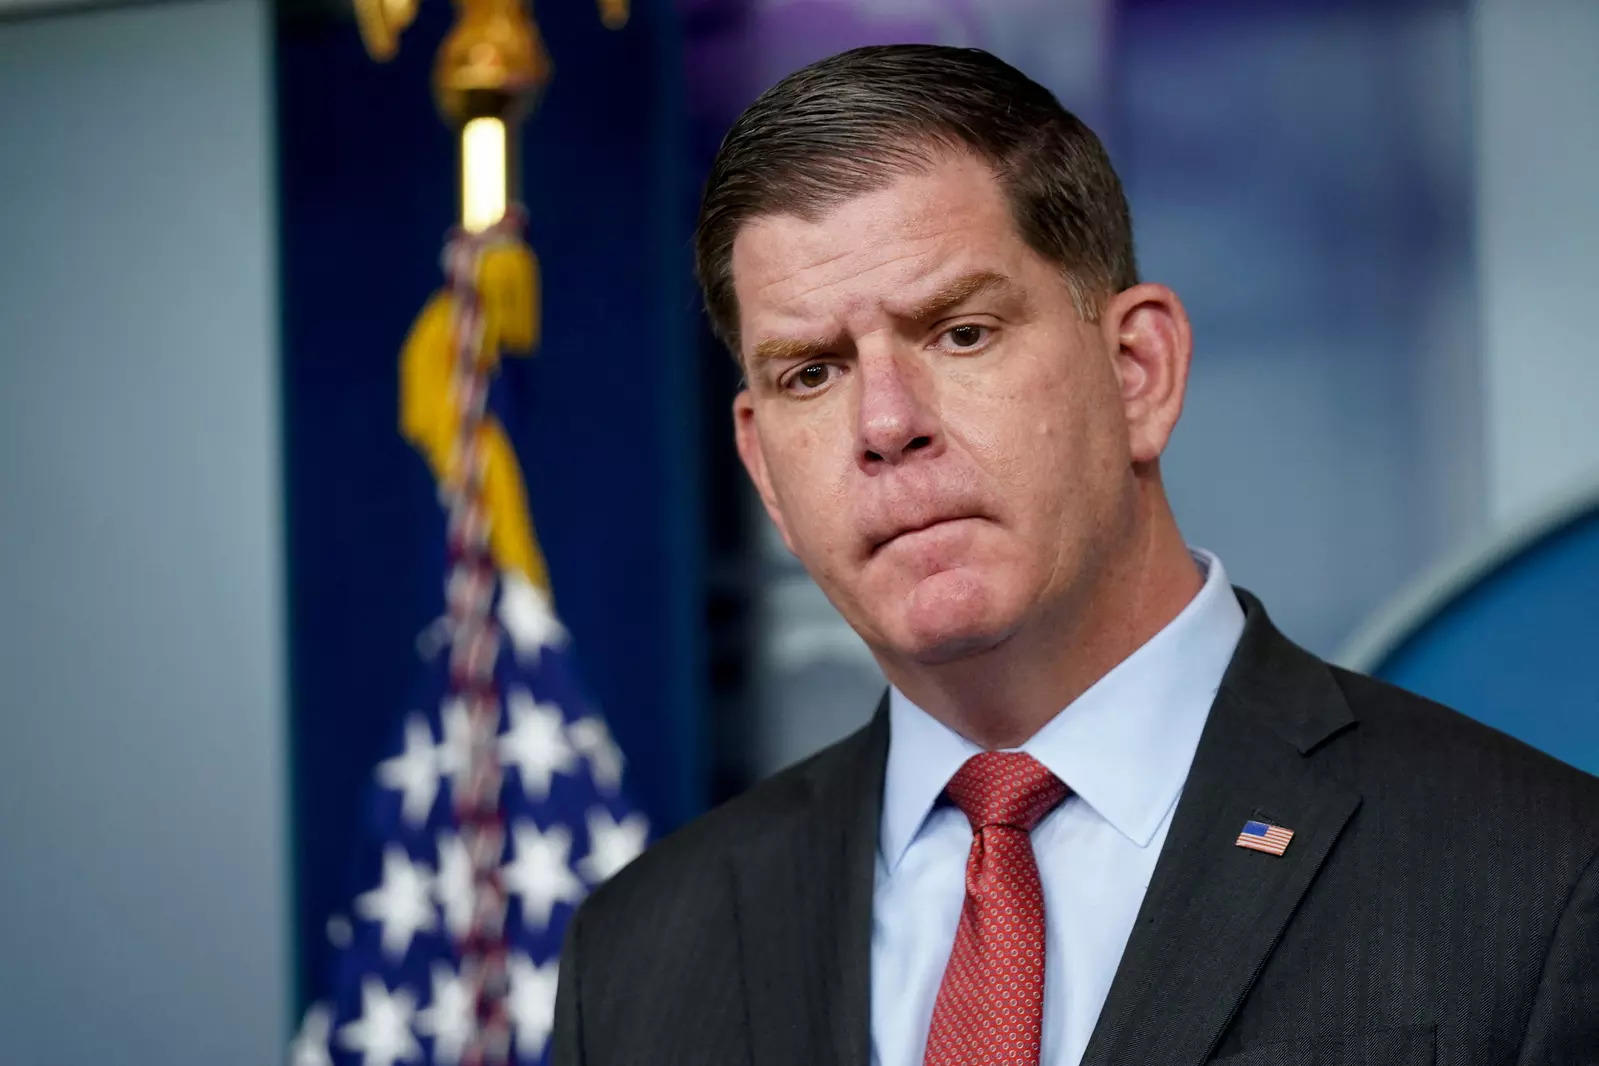 State of Union address: Marty Walsh is 'designated survivor'